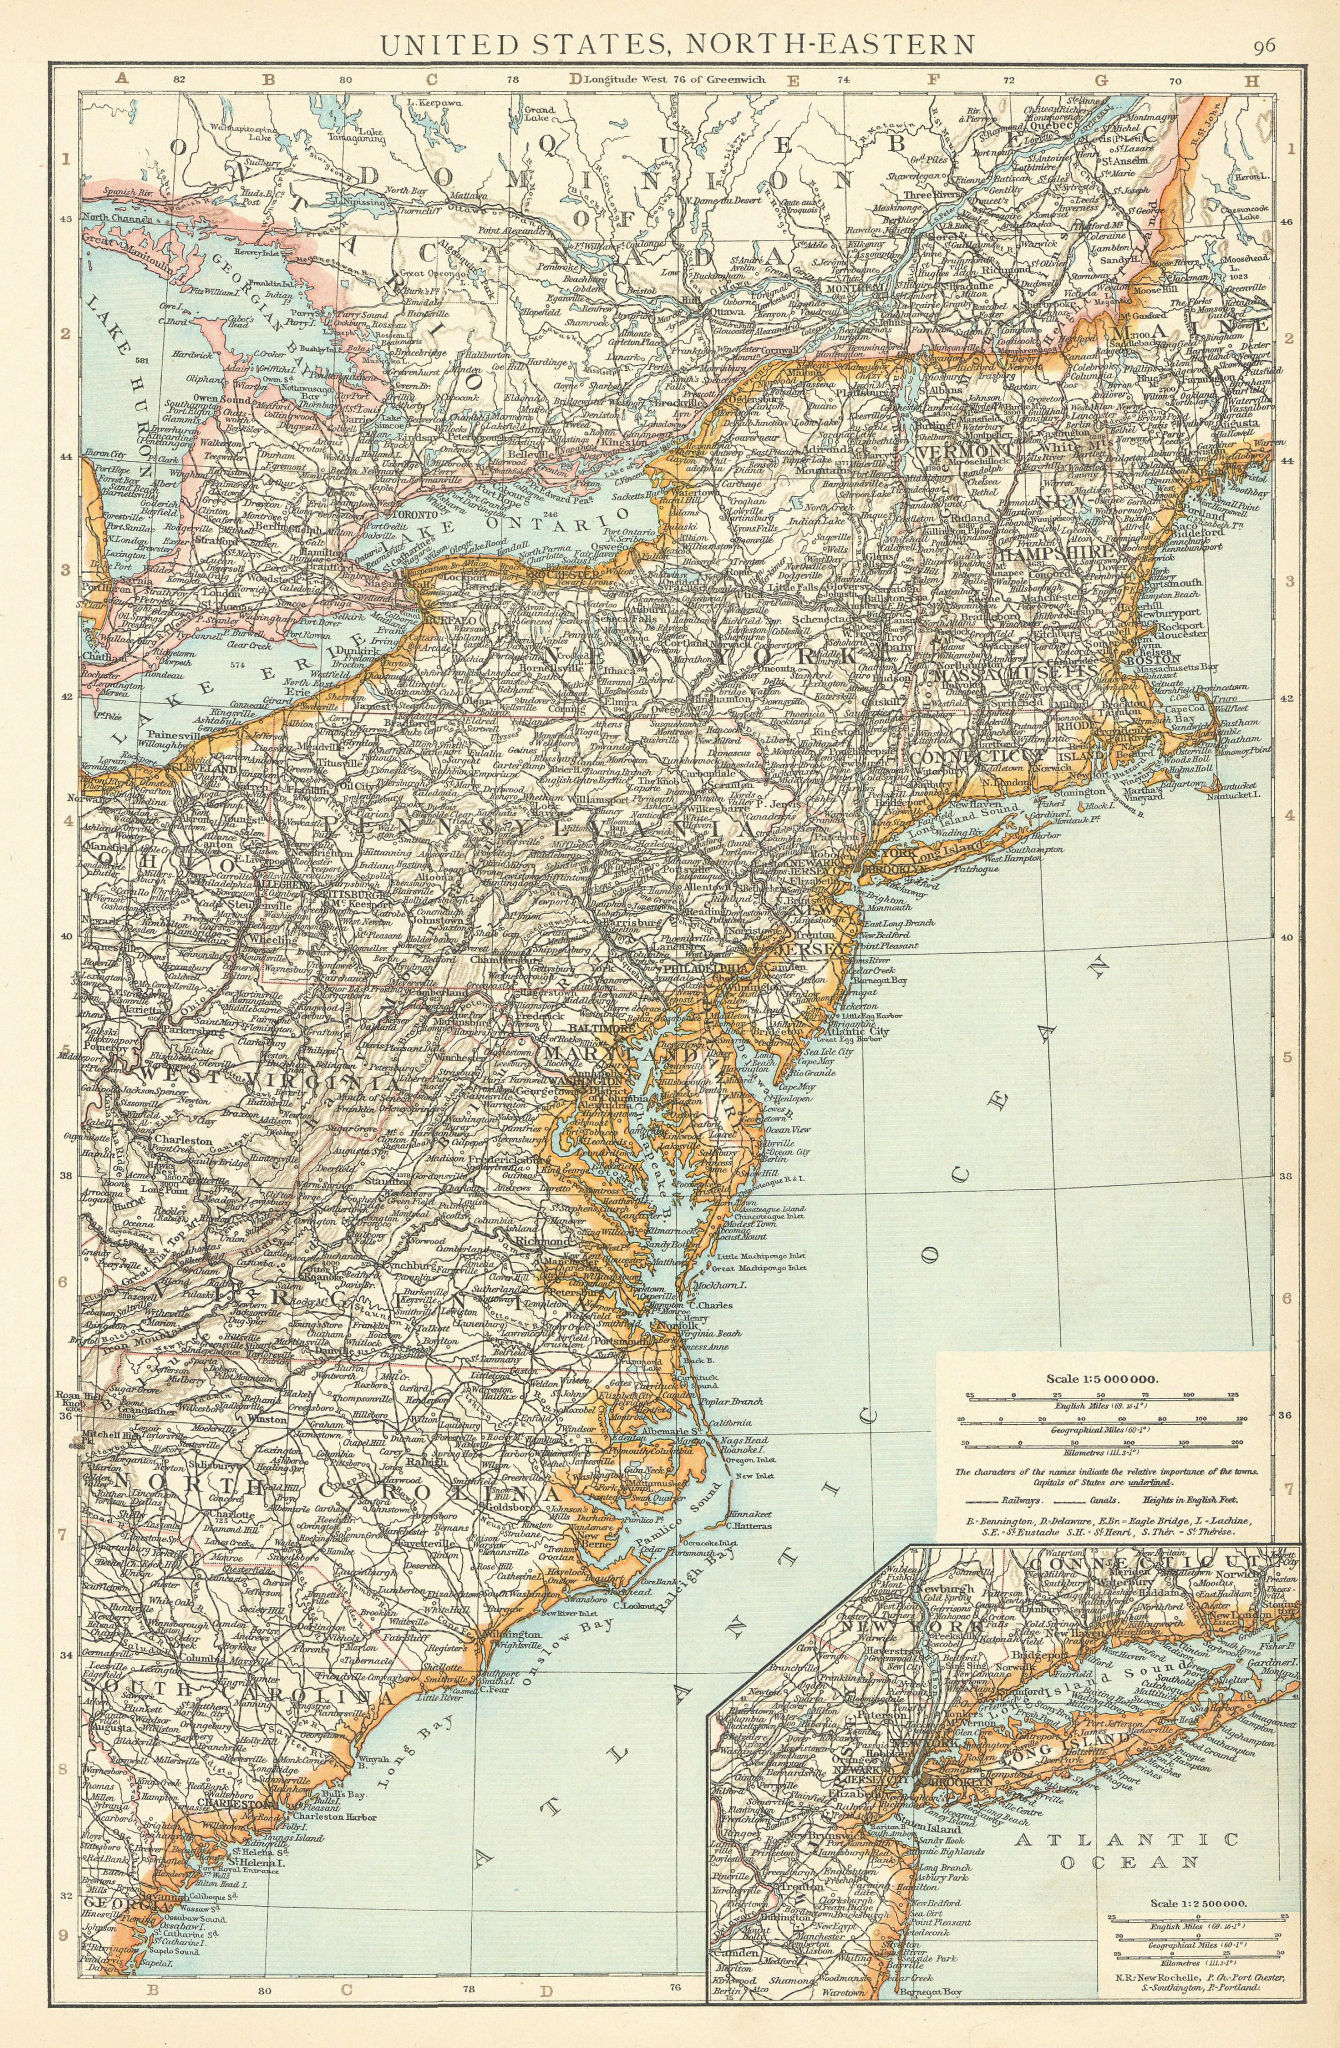 North-east United States. New England Atlantic Seaboard. TIMES 1895 old map